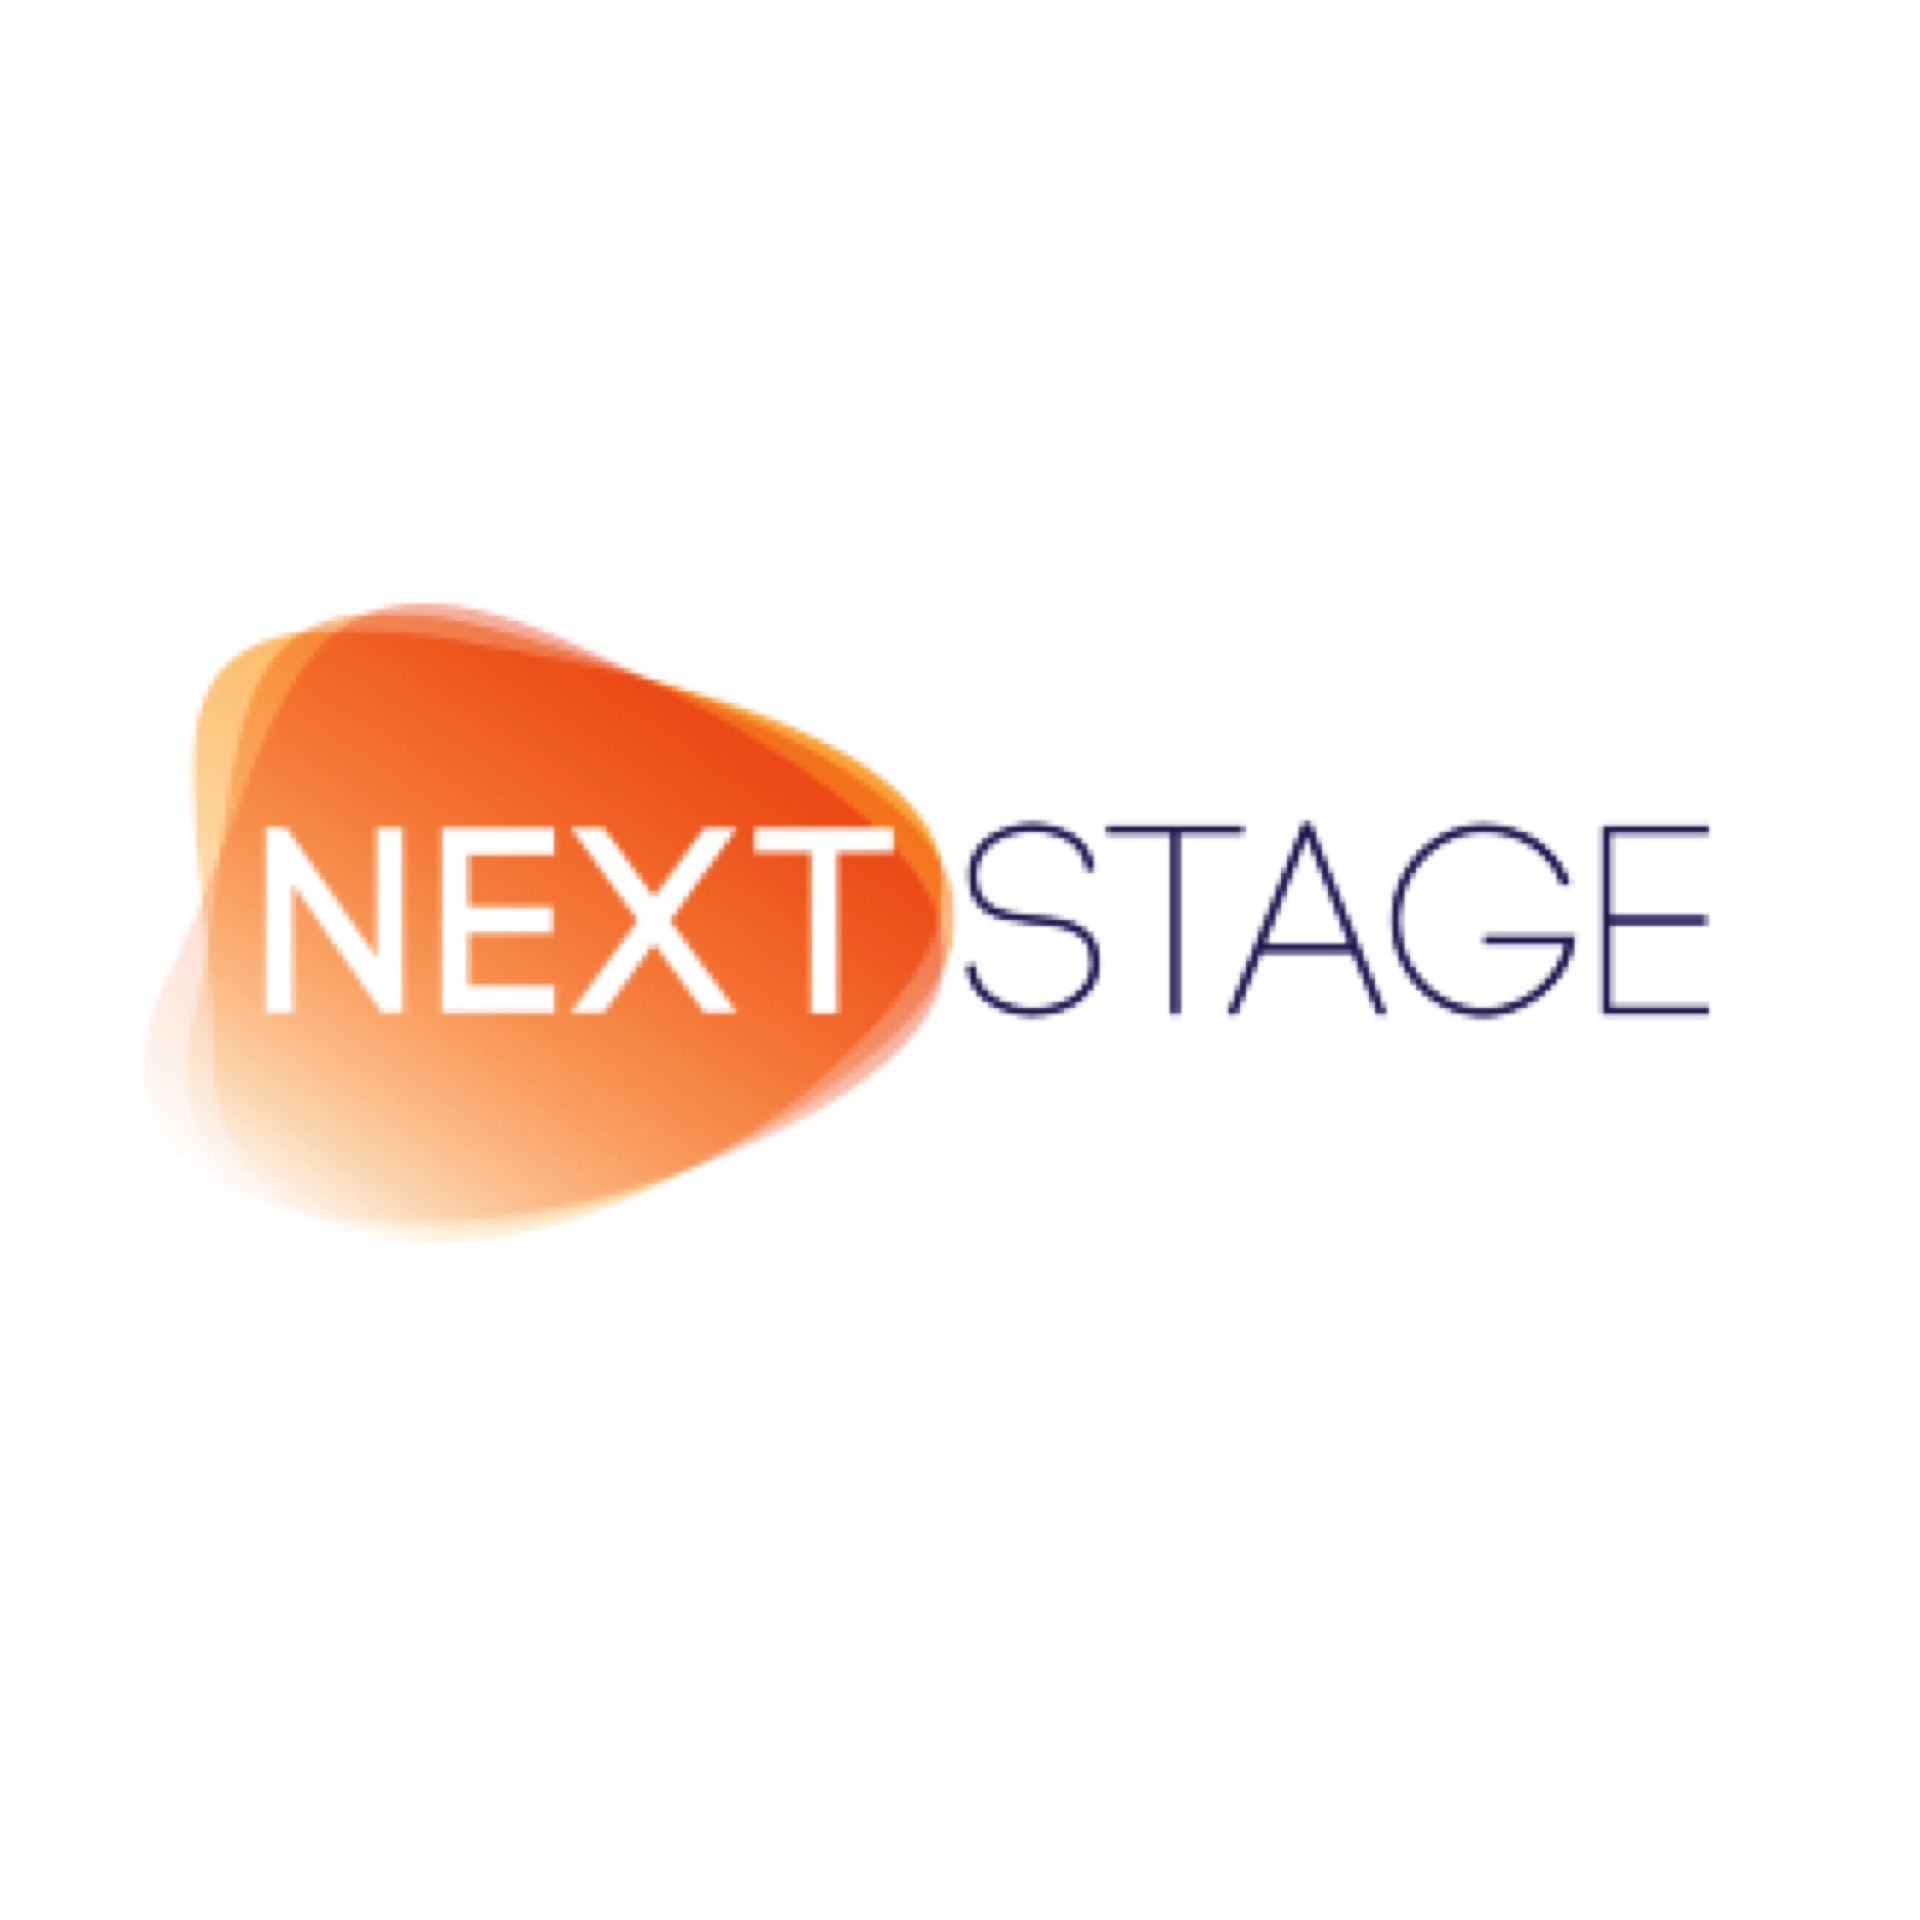 NextStage Early Stage Fund